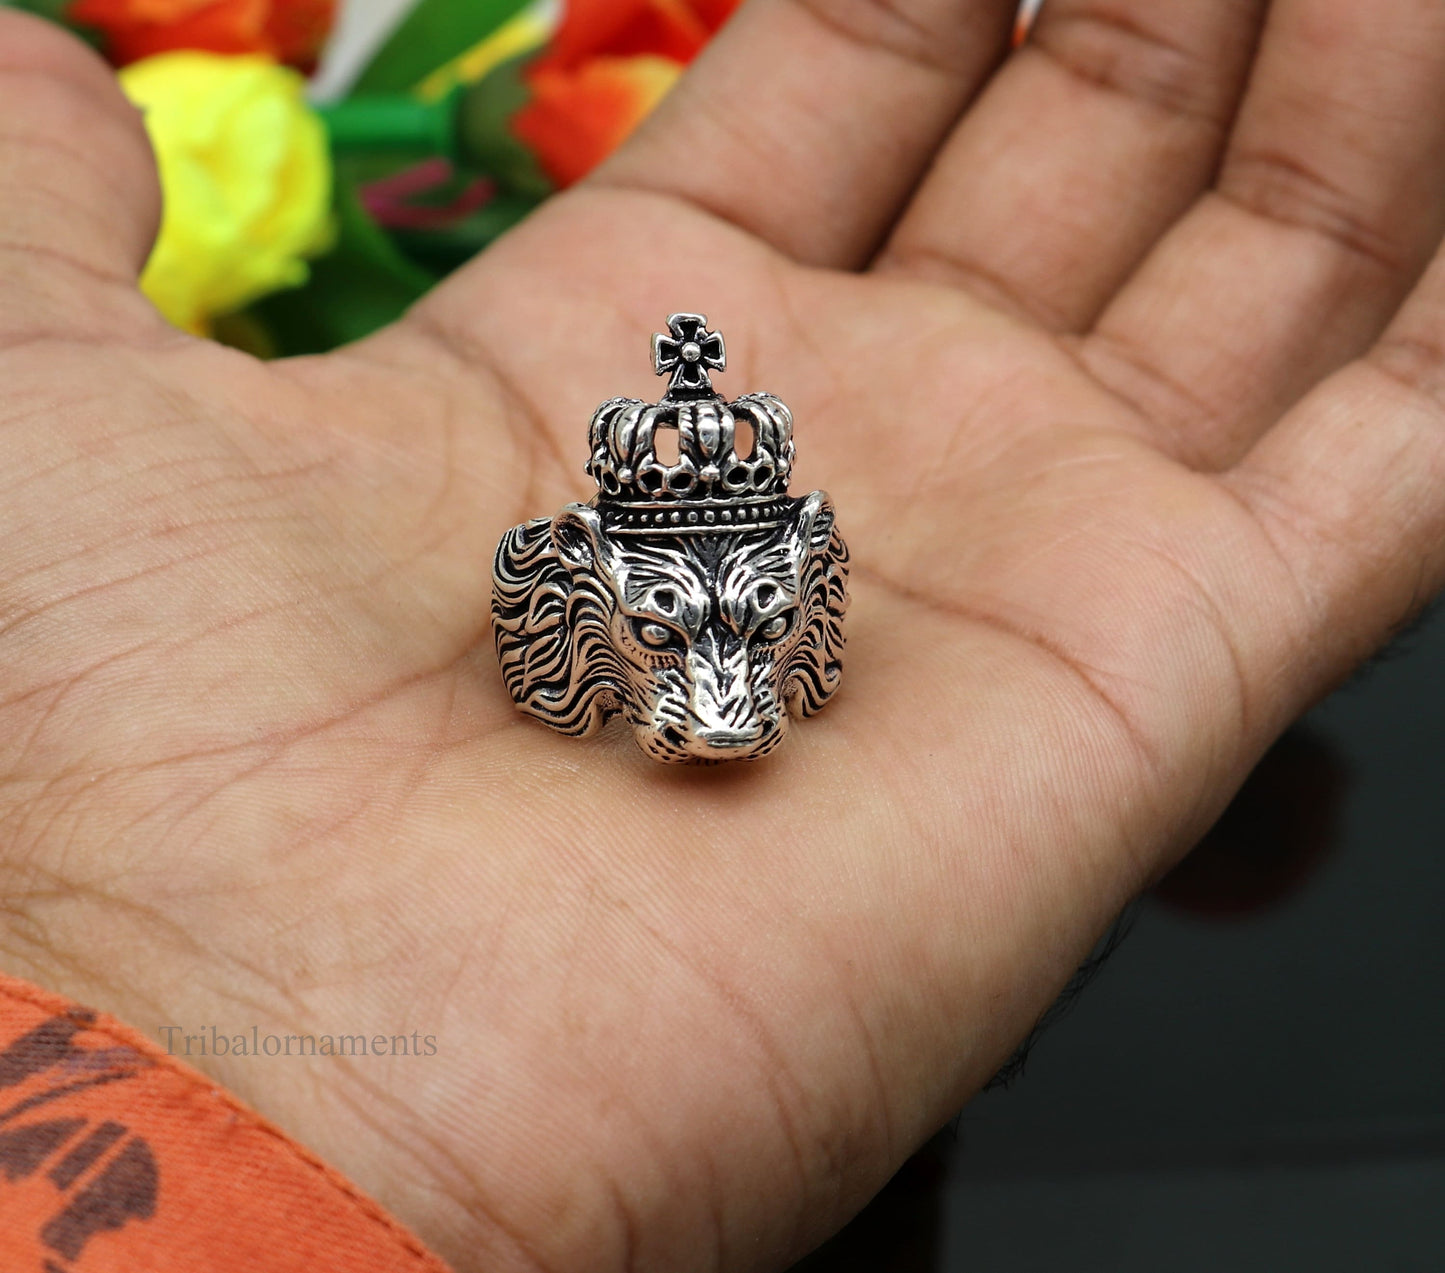 925 sterling silver handcrafted Narsimha ring , solid king lion ring, Amazing vintage design ring band for unisex gifting from india ring440 - TRIBAL ORNAMENTS